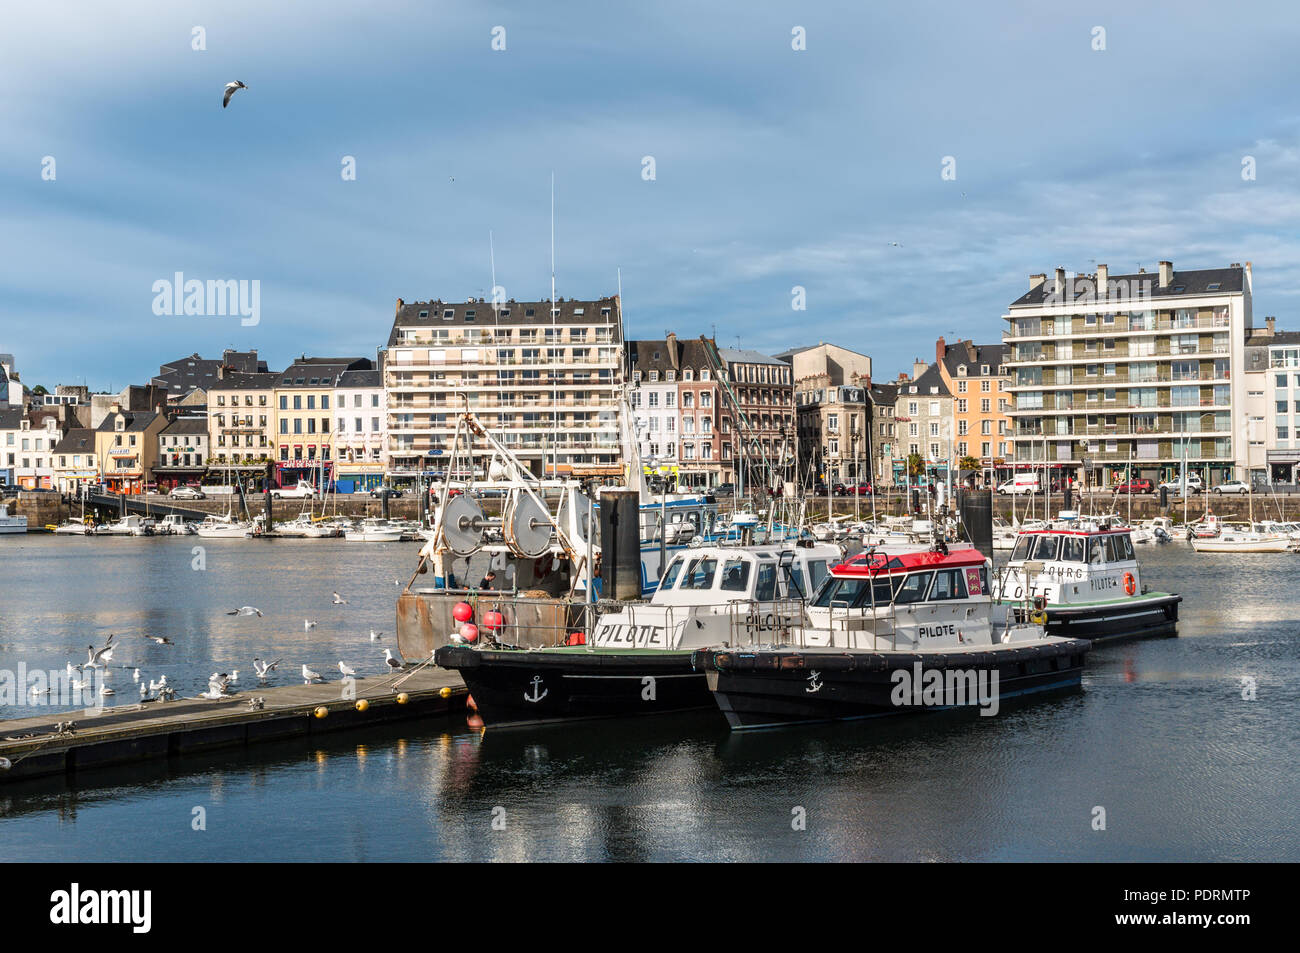 Cherbourg, France - May 22, 2017: Pilot boats moored in the port of ...